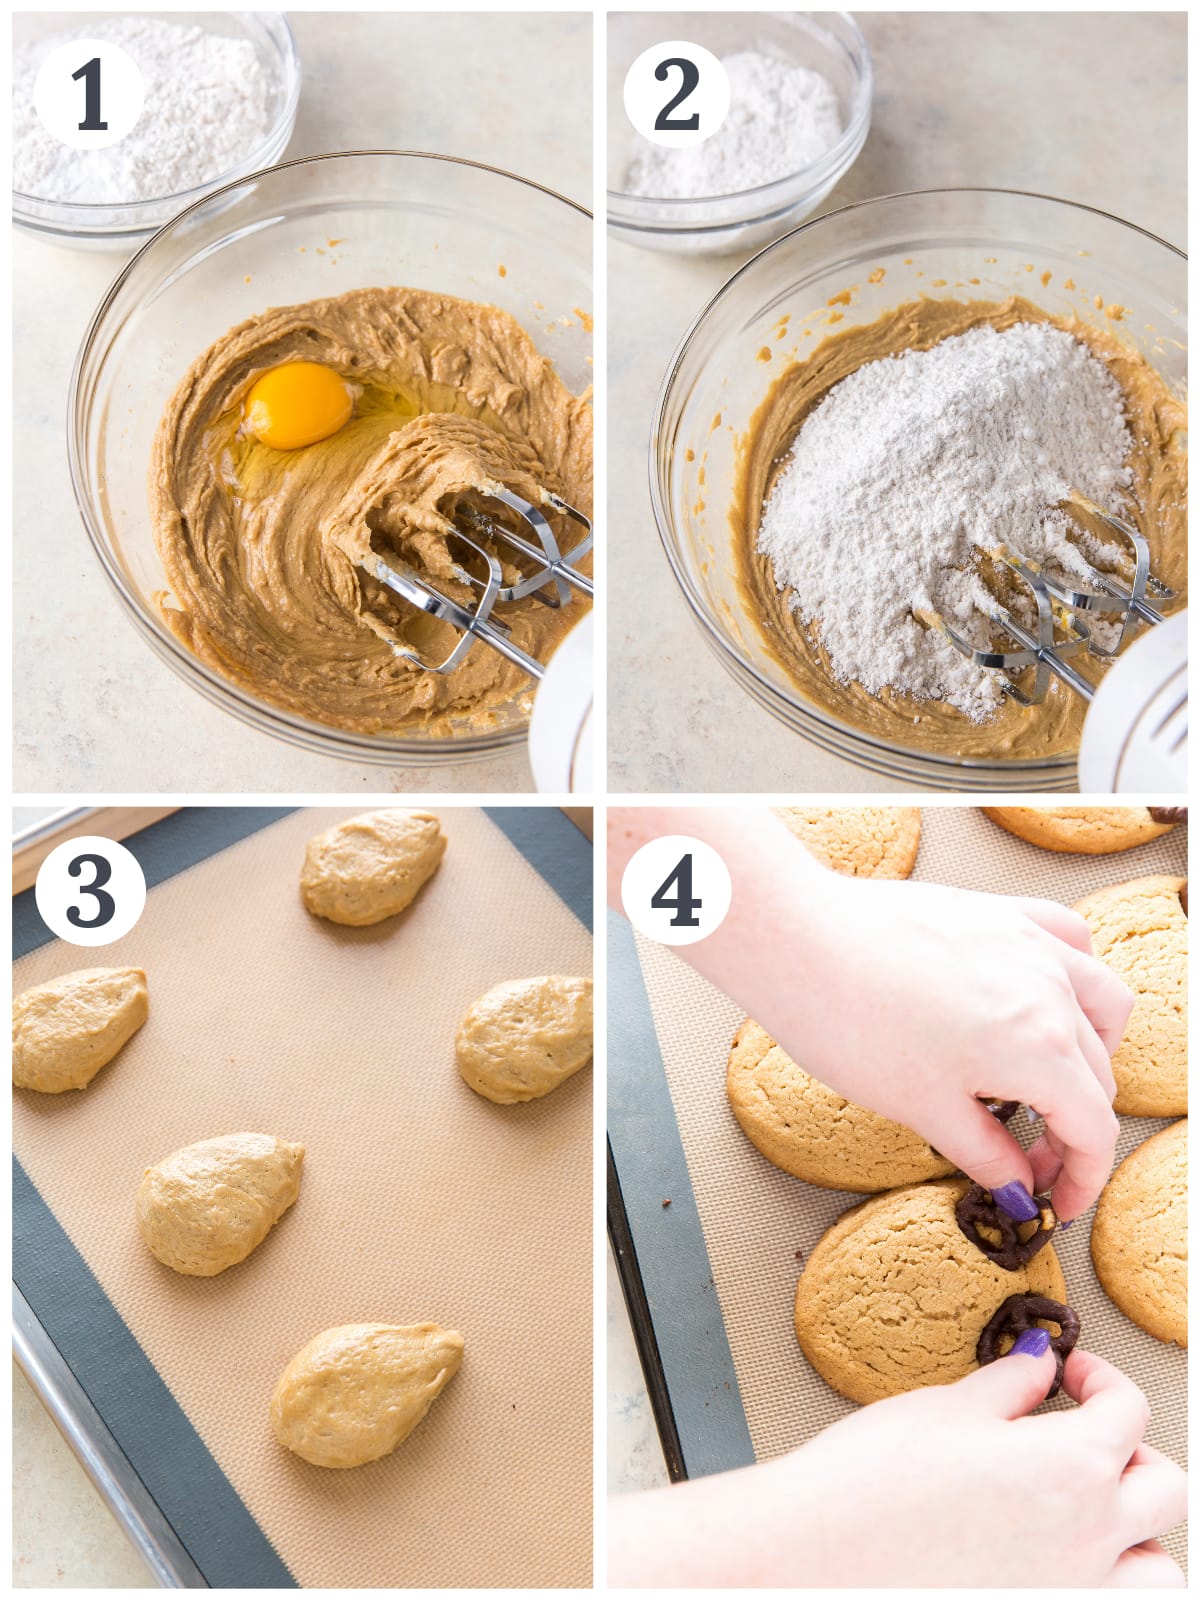 photo collage demonstrating how to make peanut butter reindeer cookie dough in a mixing bowl with a hand mixer and shape the dough into reindeer heads.